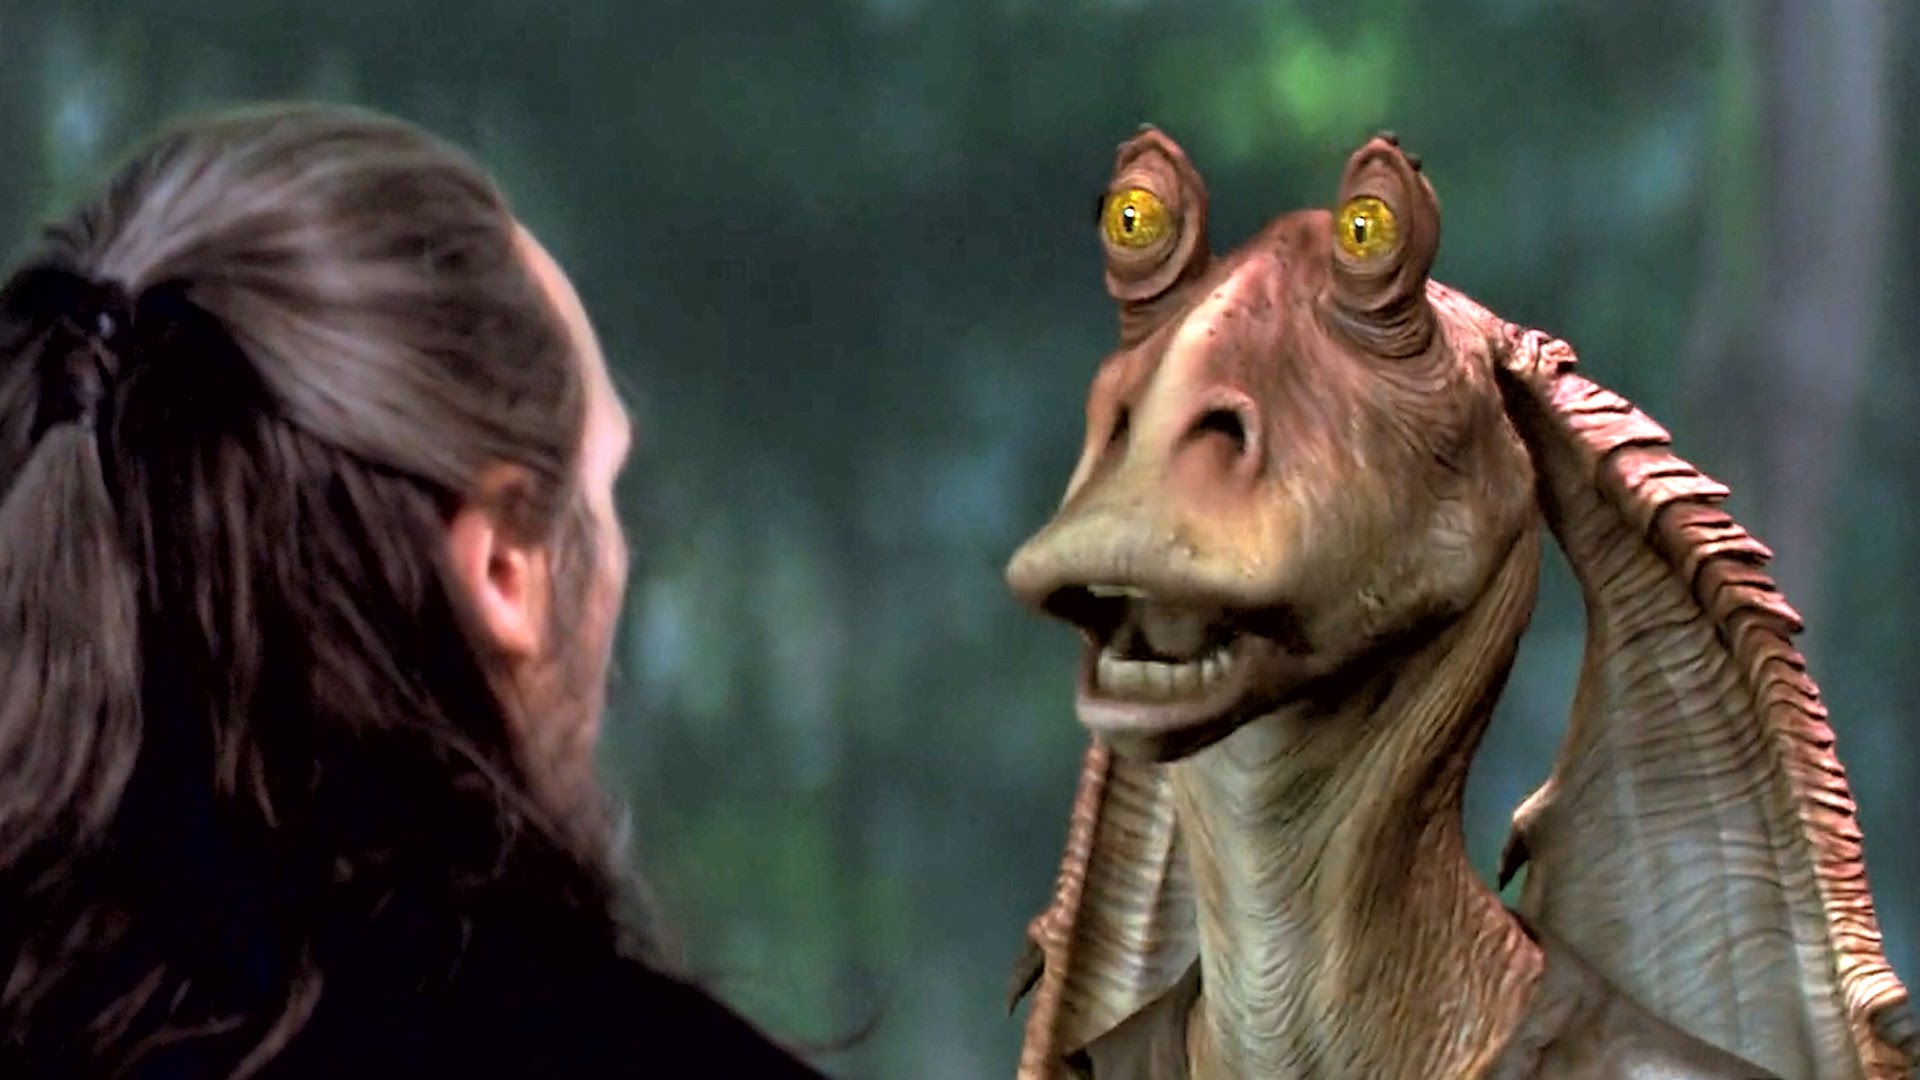 Star Wars Actor Ahmed Best Says He Considered Suicide After Jar Jar